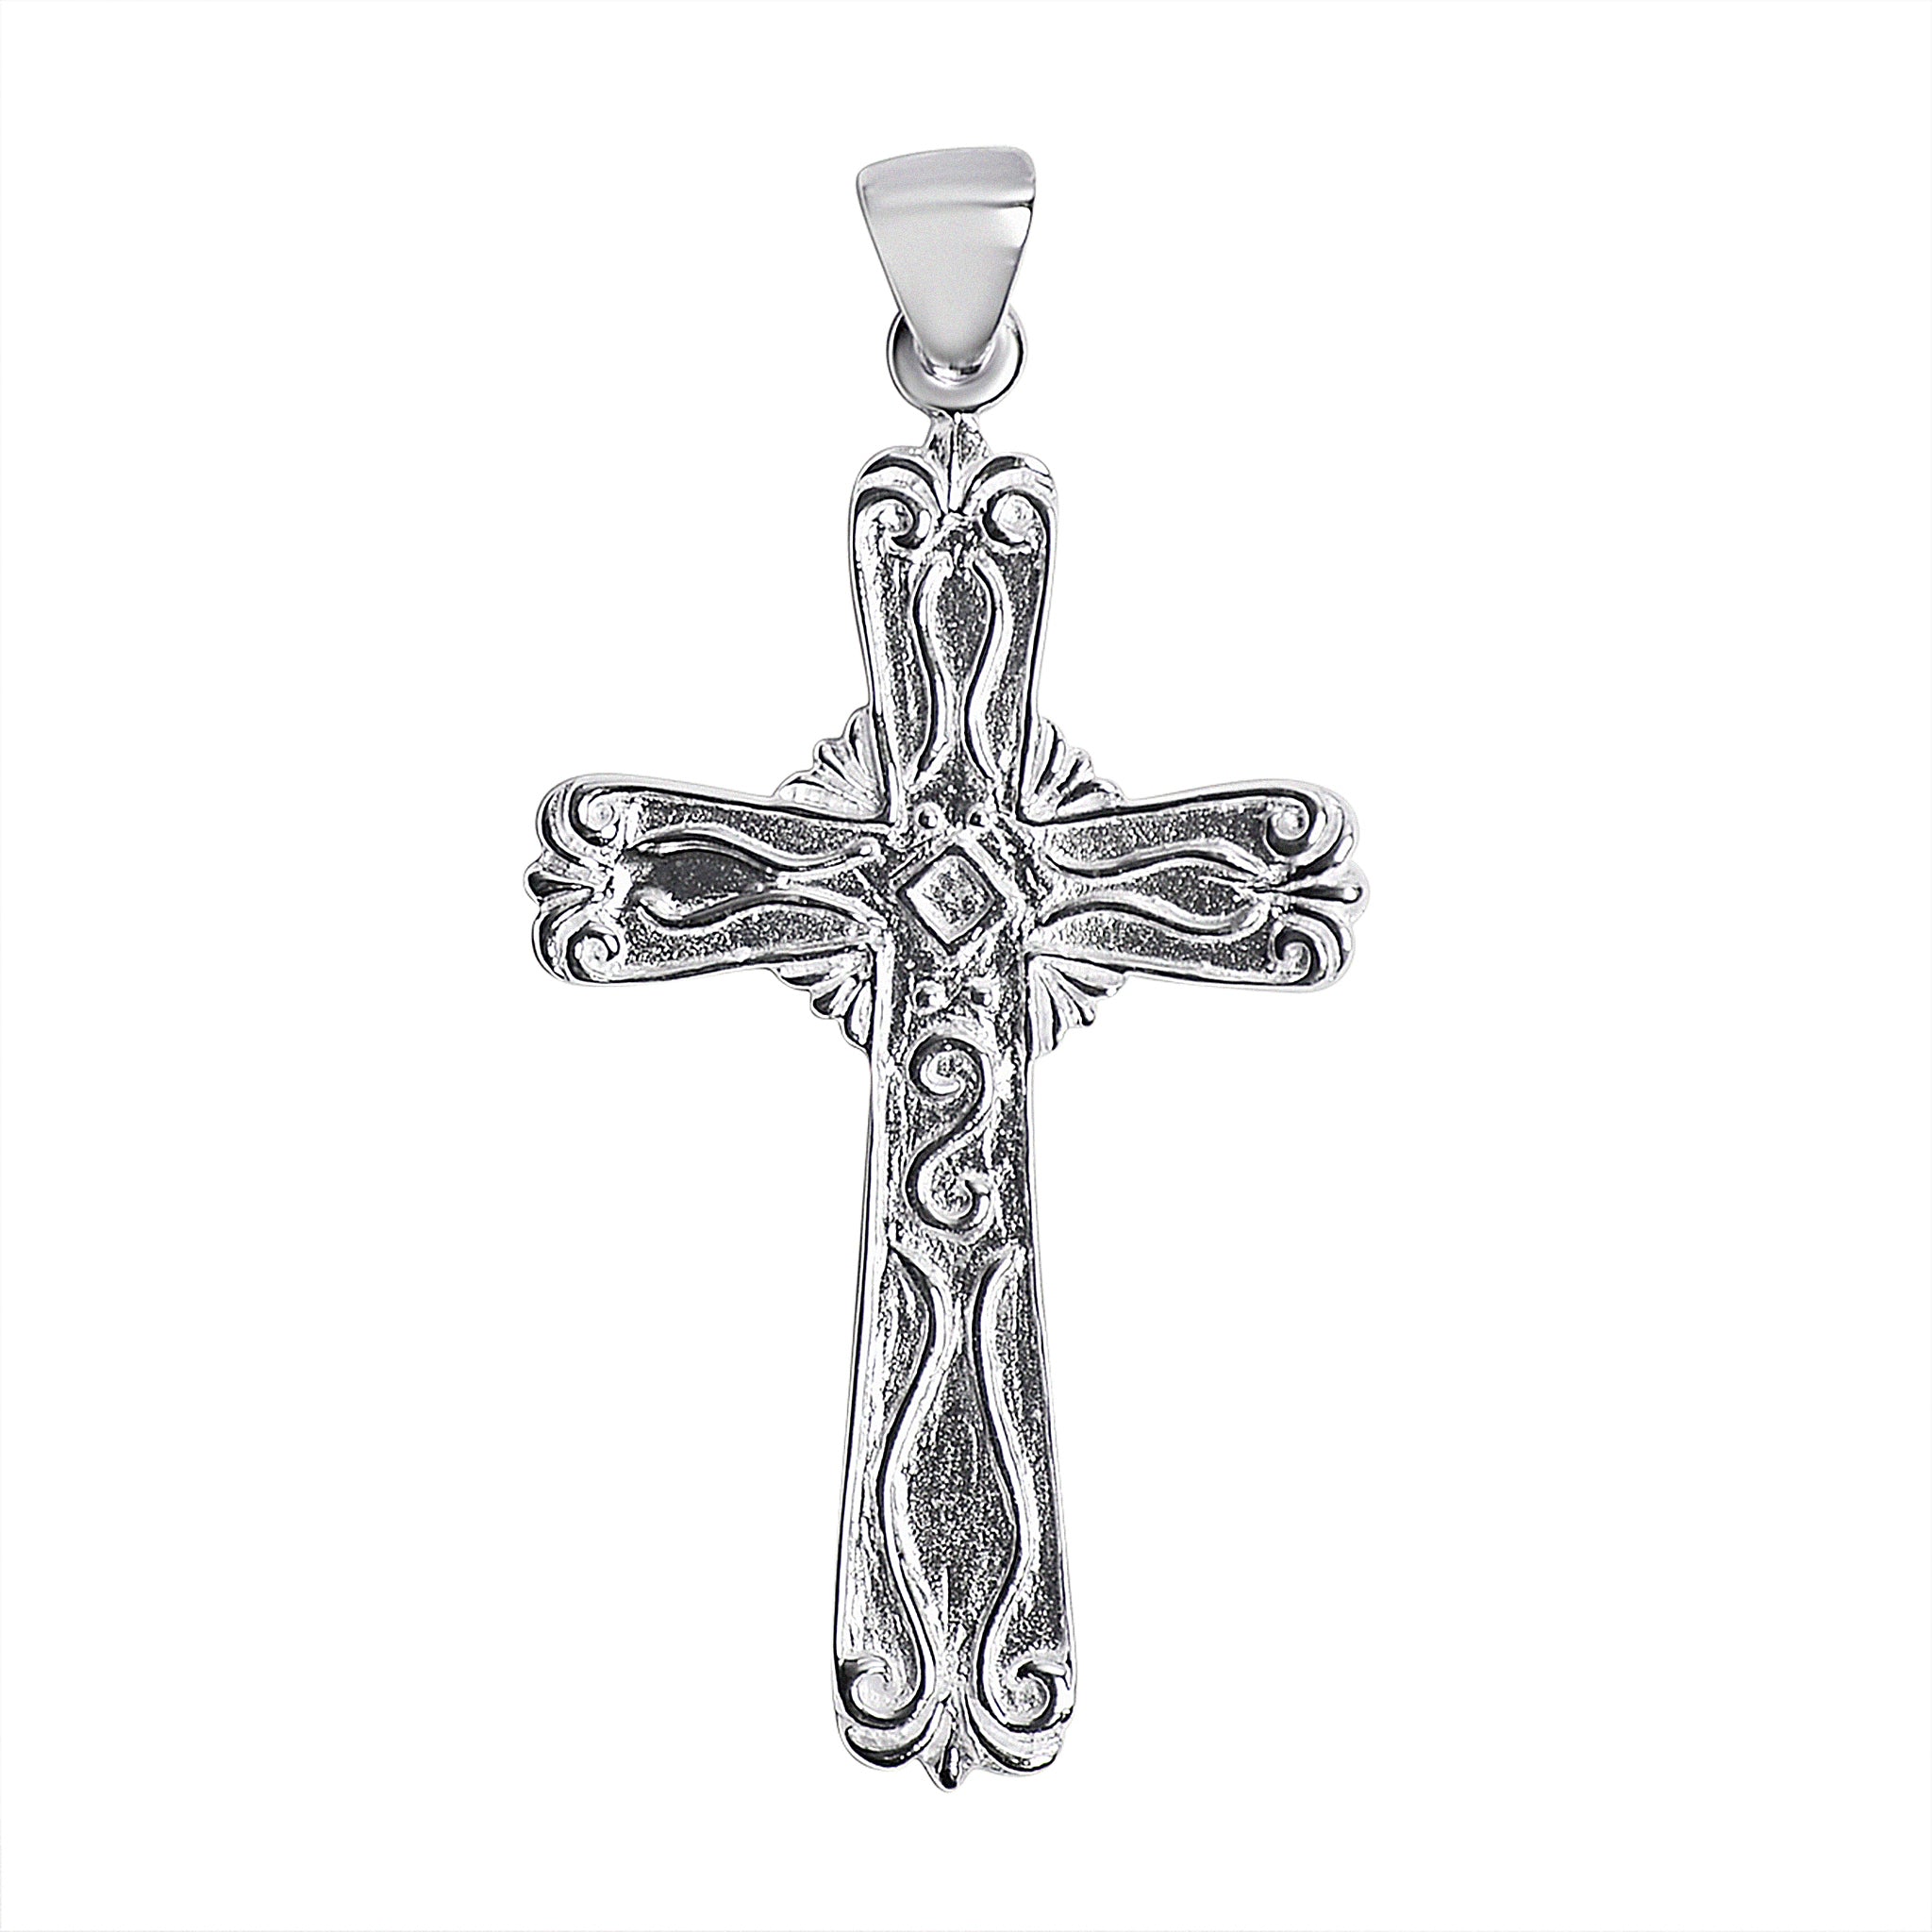 Sterling Silver Filigree Cross Pendant / SSP0013-sterling silver pendant- 925 sterling silver pendant- Black Friday Gift- silver pendent- nackles pendent